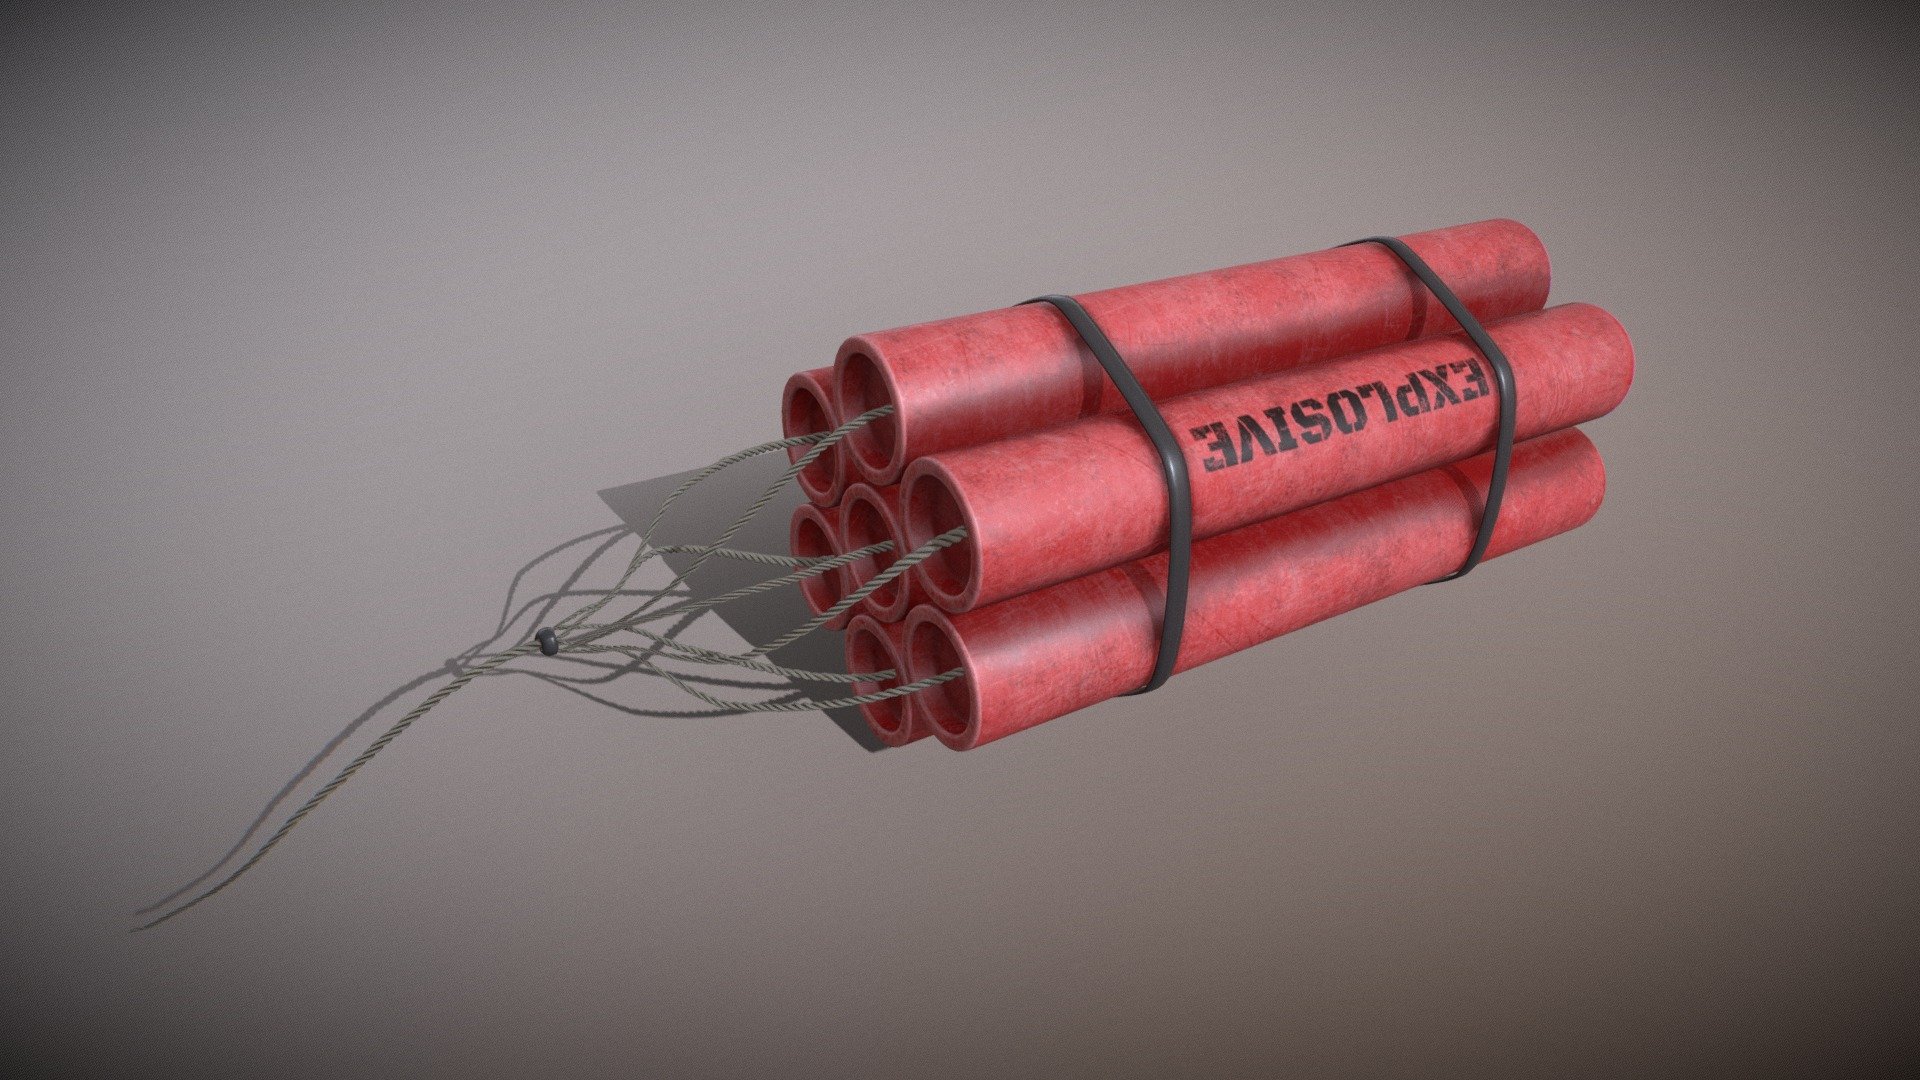 3D mid-poly model of TNT High-Explosive Bomb

Beware! If you set fire to the fuse, you need to run far away!

PBR 4K texture set with occlusion effect. 

Pls, feel free to ask about other formats or texture dimensions 3d model